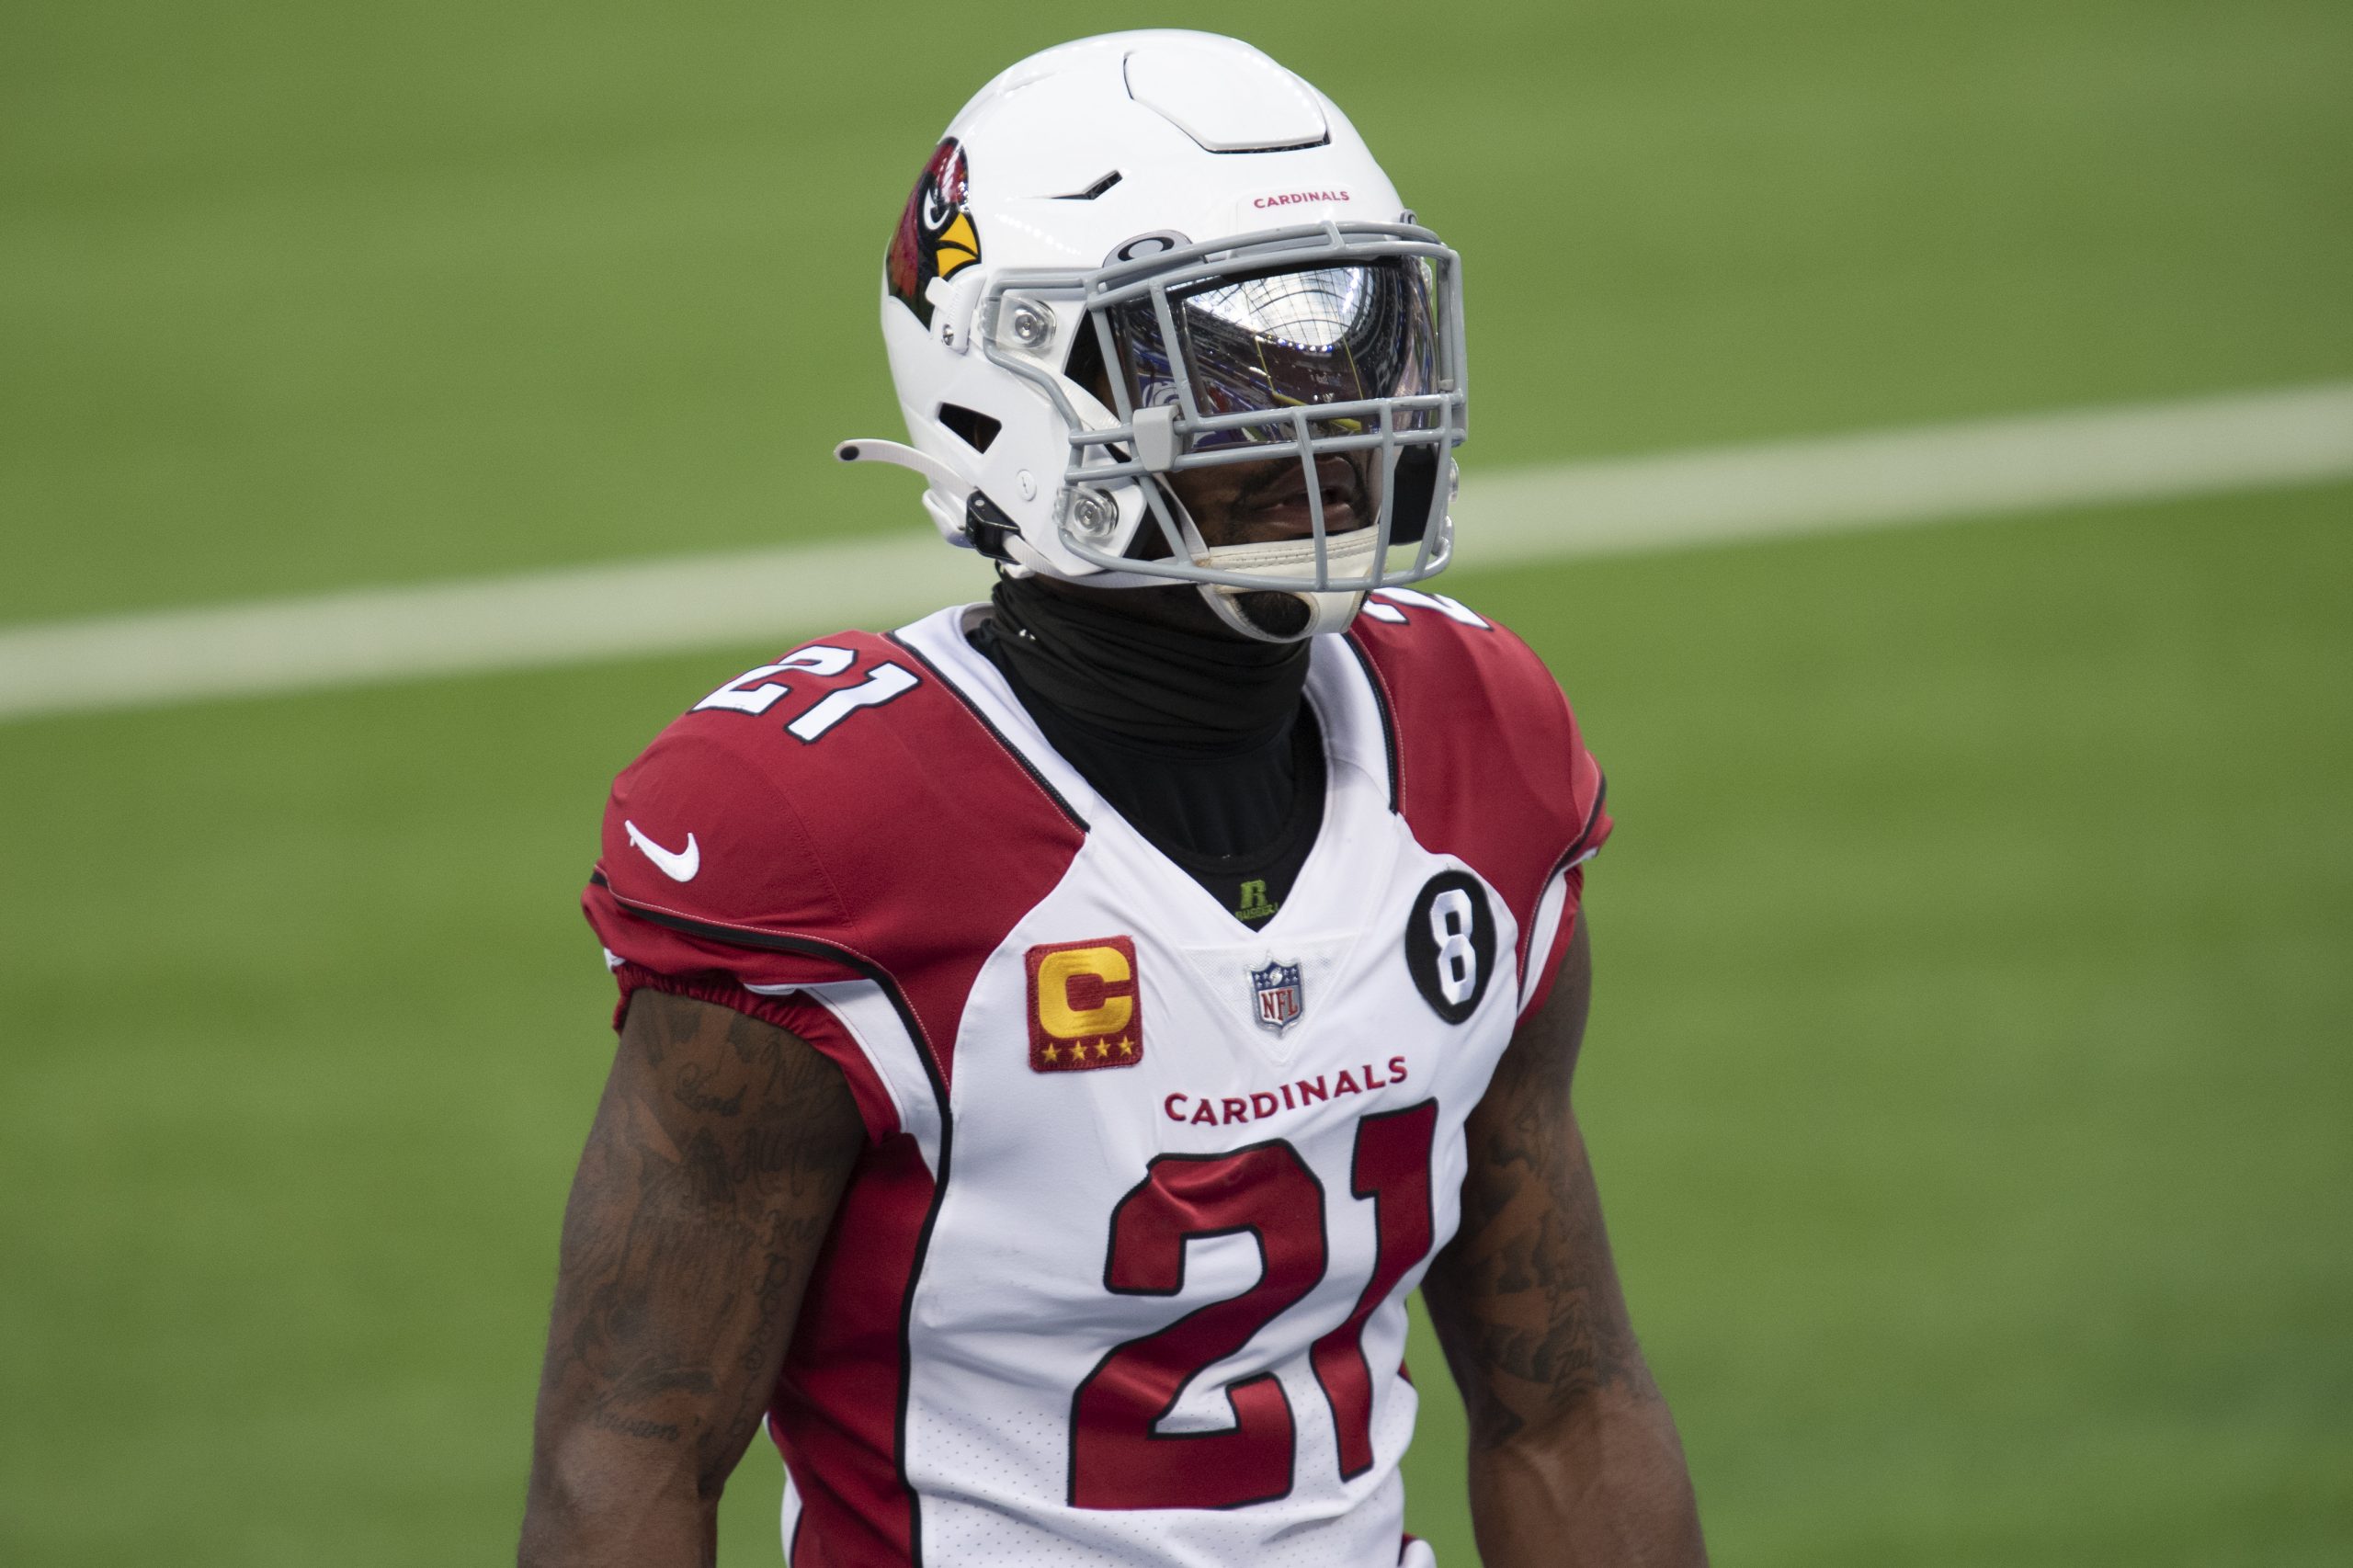 Vikings’ Patrick Peterson Discusses Benefits of NFL Players Getting COVID-19 Vaccine